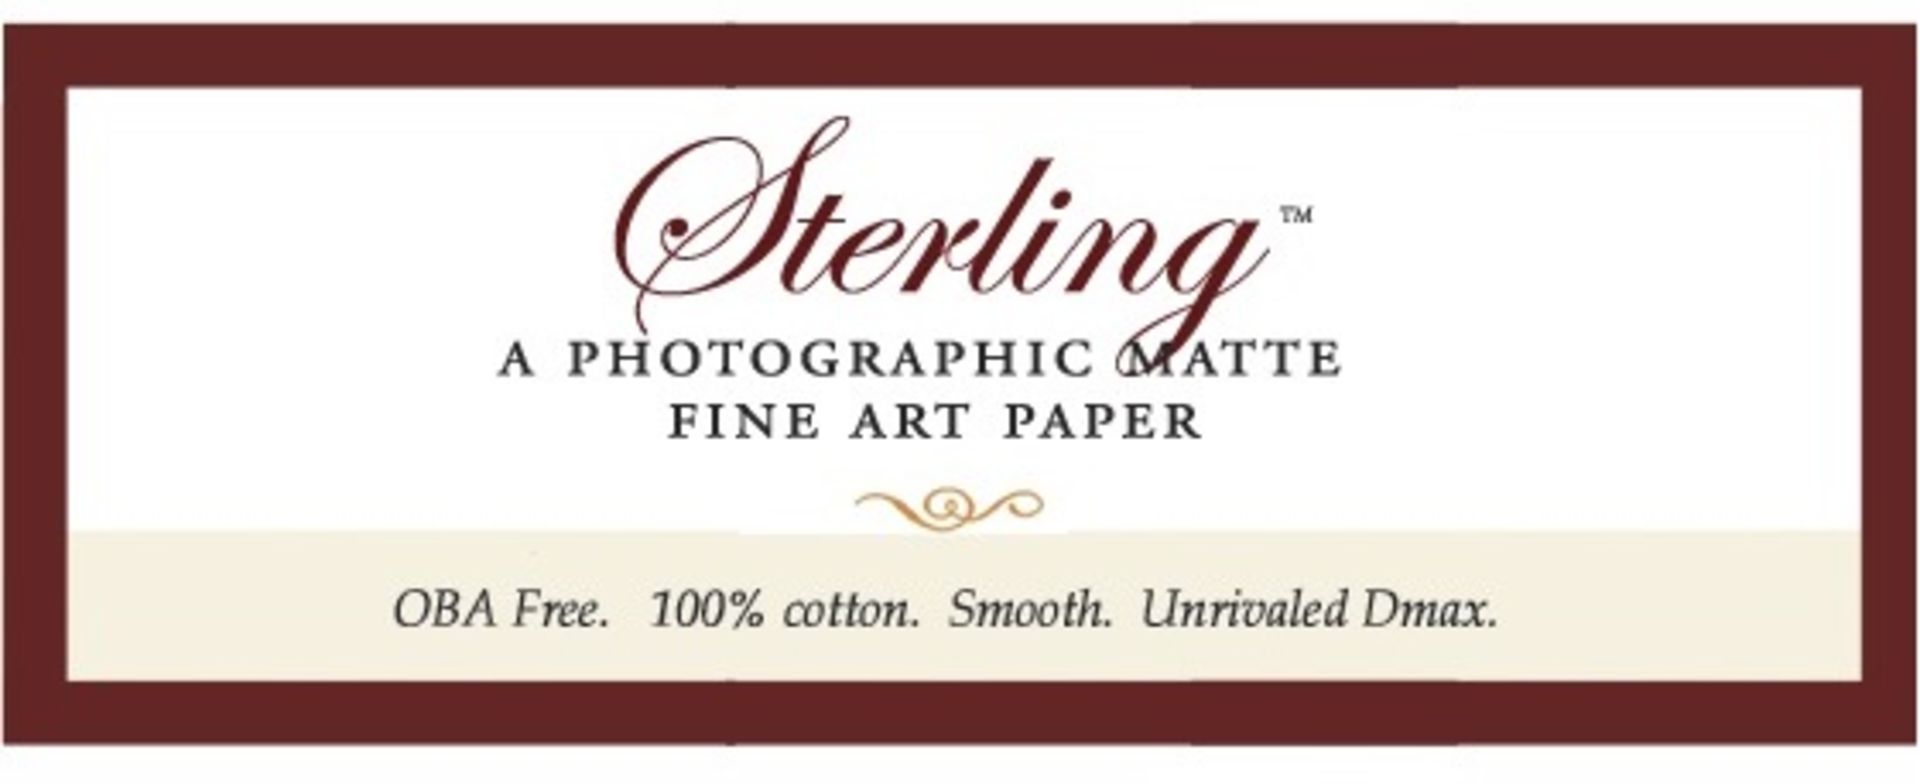 1 x Roll of Breathing Colour STERLING Photographic Matte Fine Art Paper - Size 24" x 50' - - Image 2 of 5